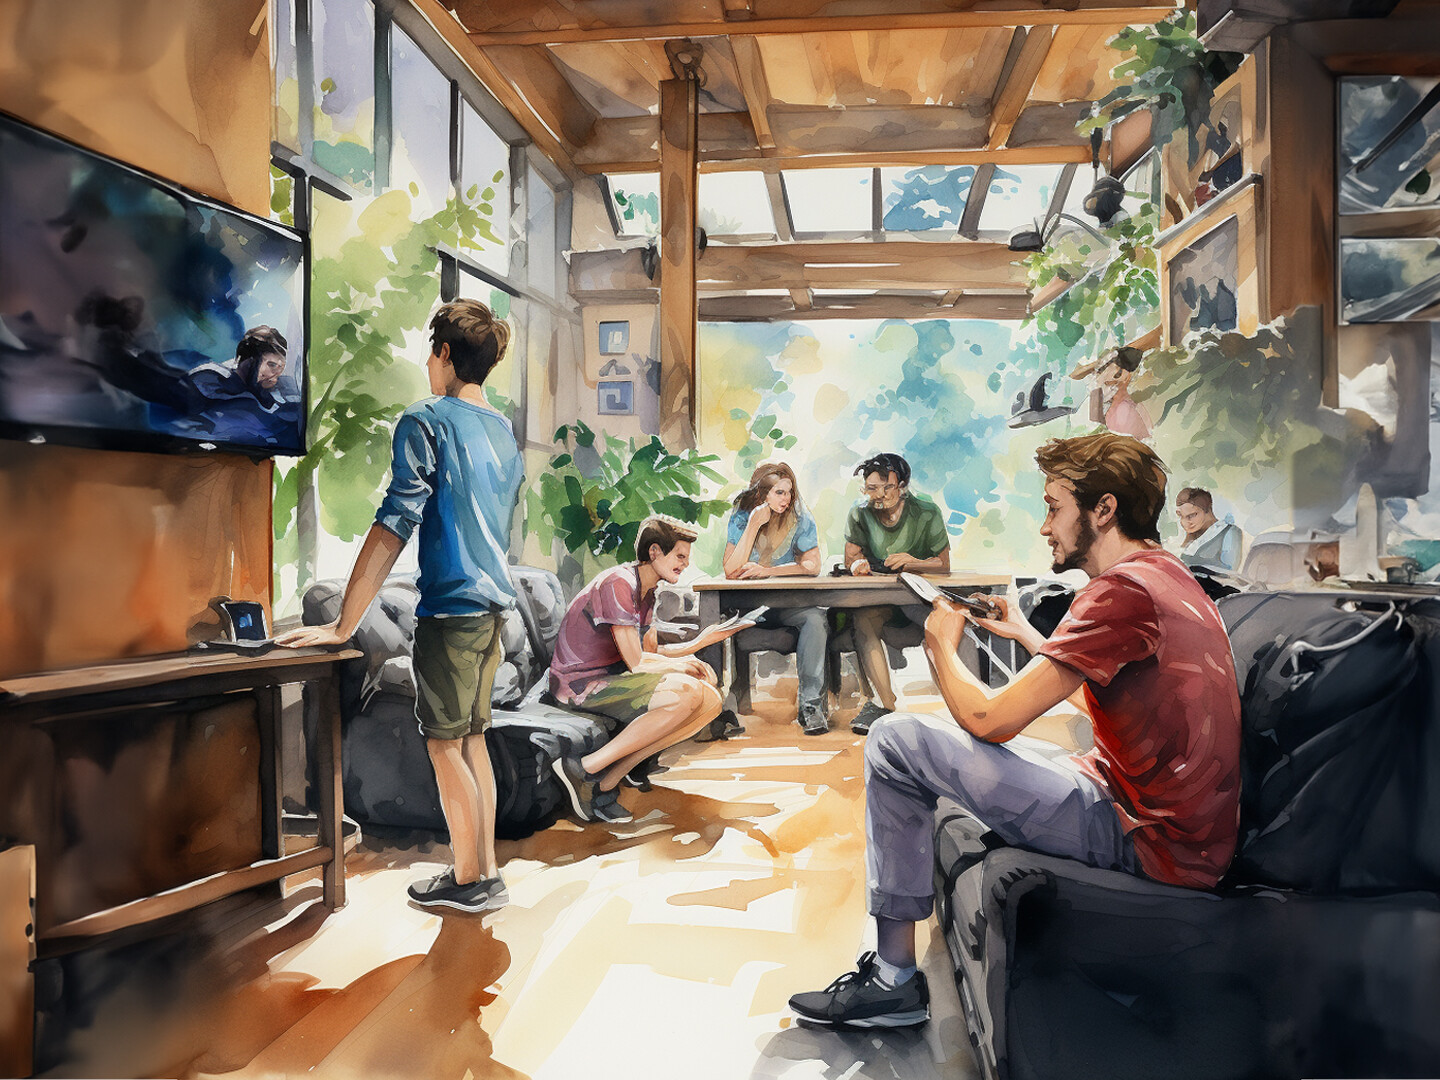 AI generated image of teens gathered in a cozy space watching TV, using smartphones, and engaging in conversation.